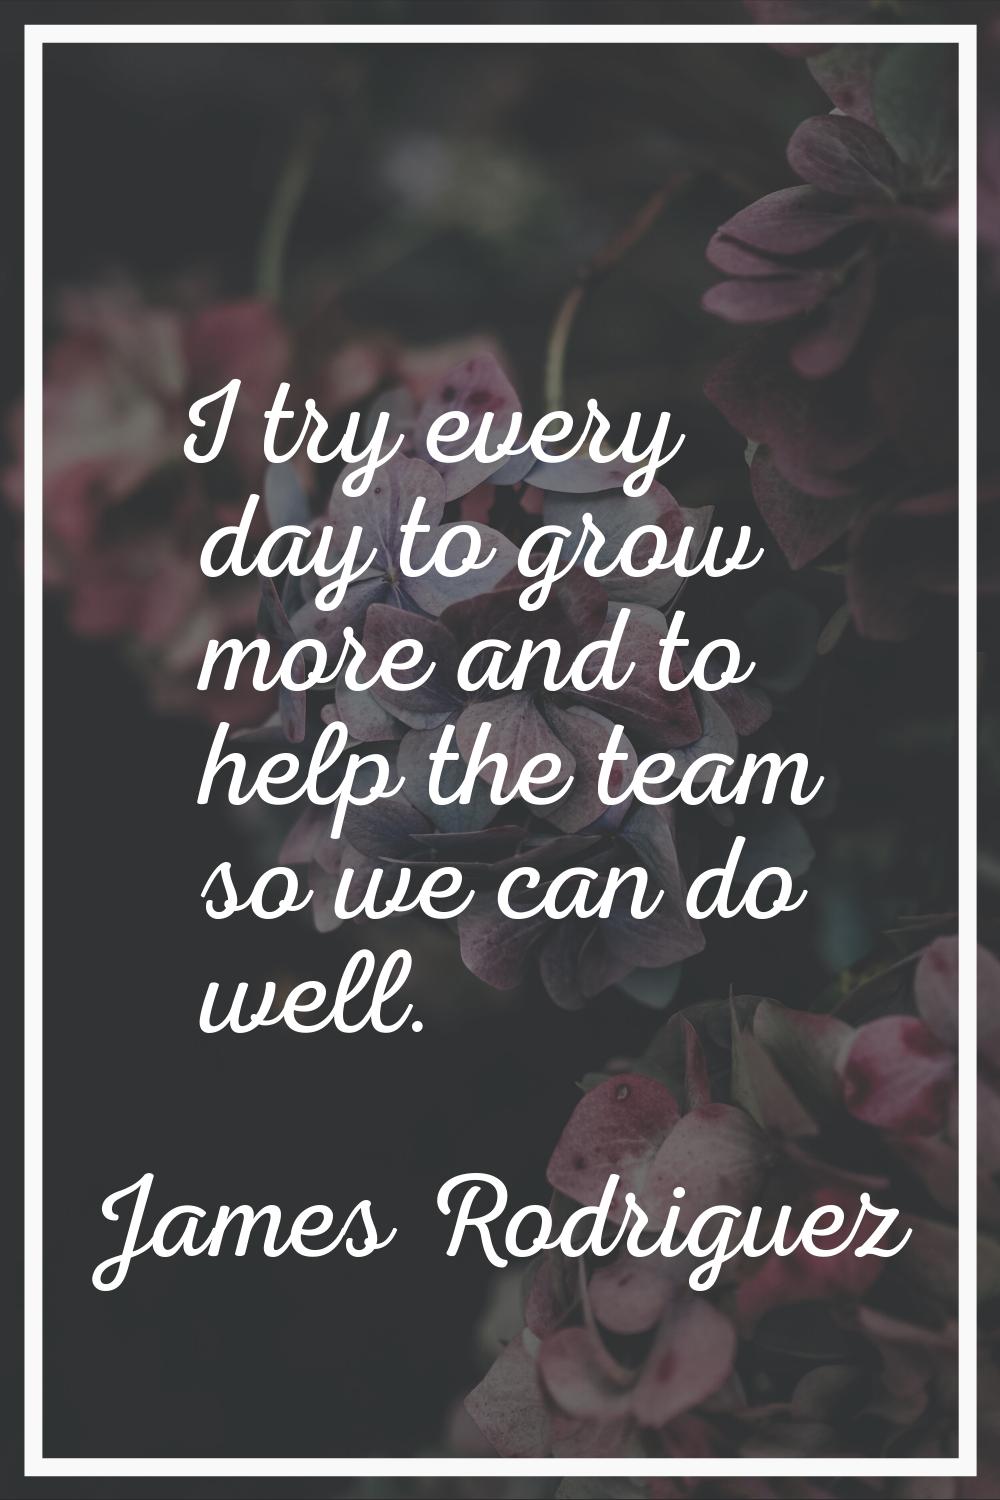 I try every day to grow more and to help the team so we can do well.